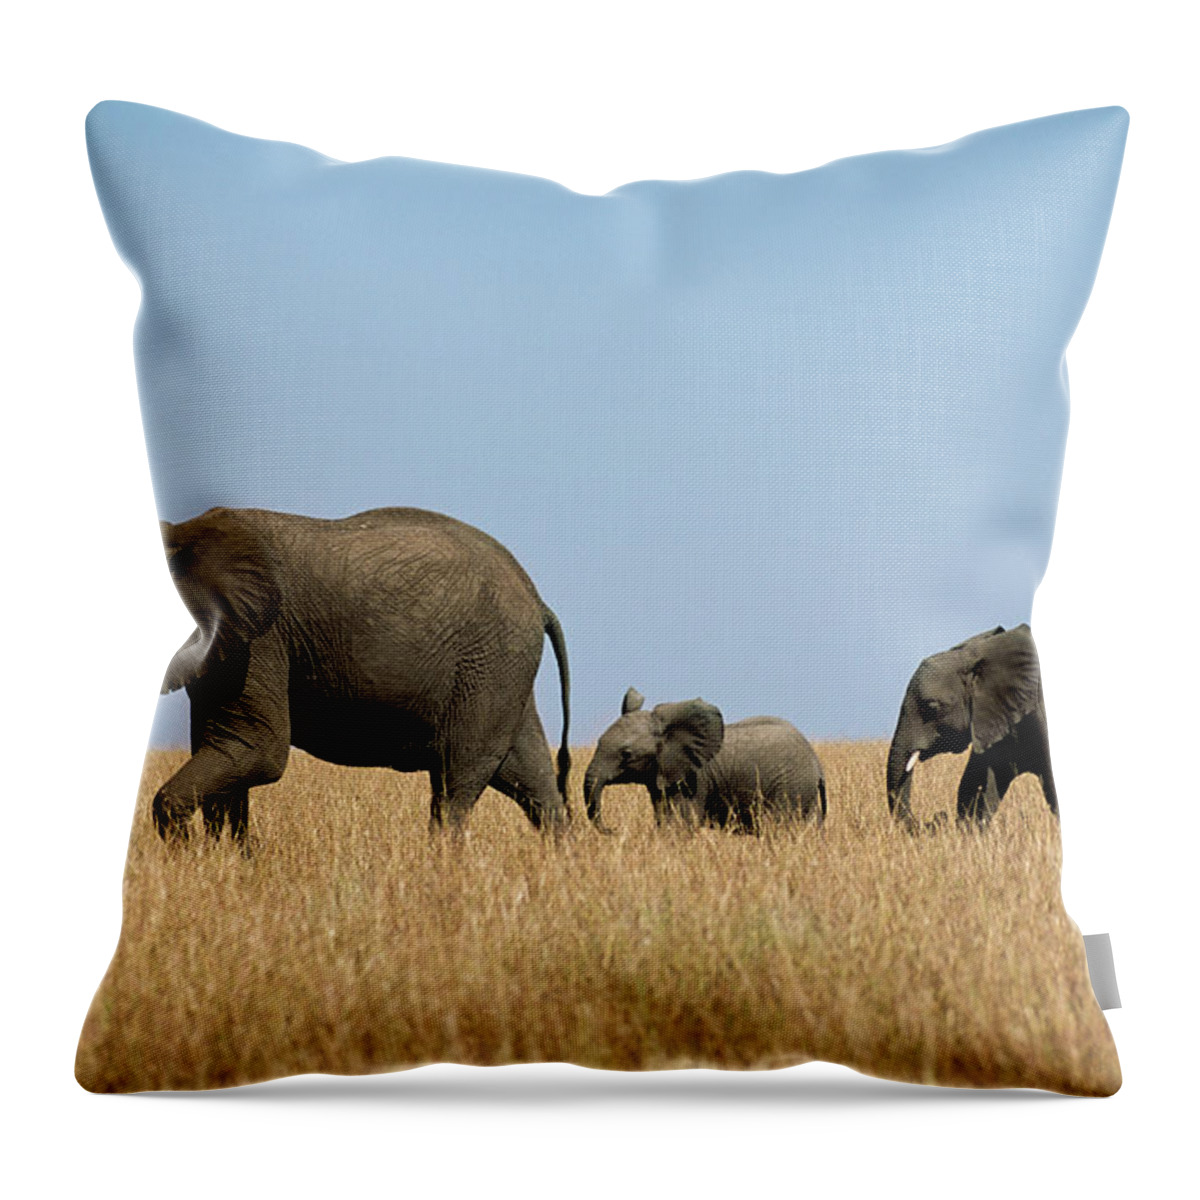 Following Throw Pillow featuring the photograph Group Of African Elephants Loxodonta by James Warwick